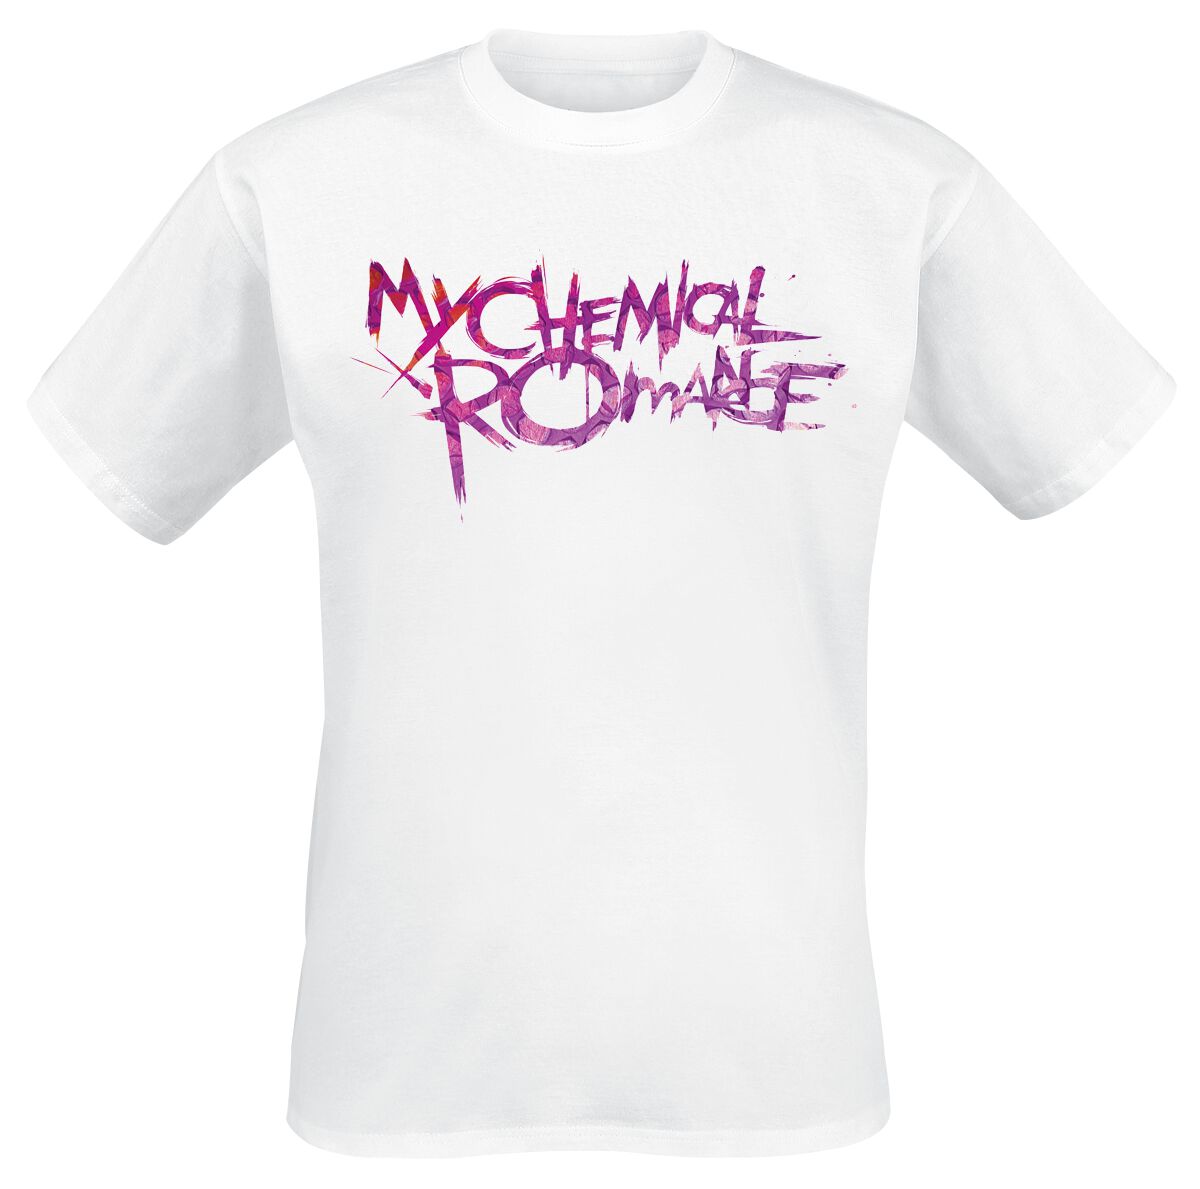 My Chemical Romance Black Parade T-Shirt weiß in S